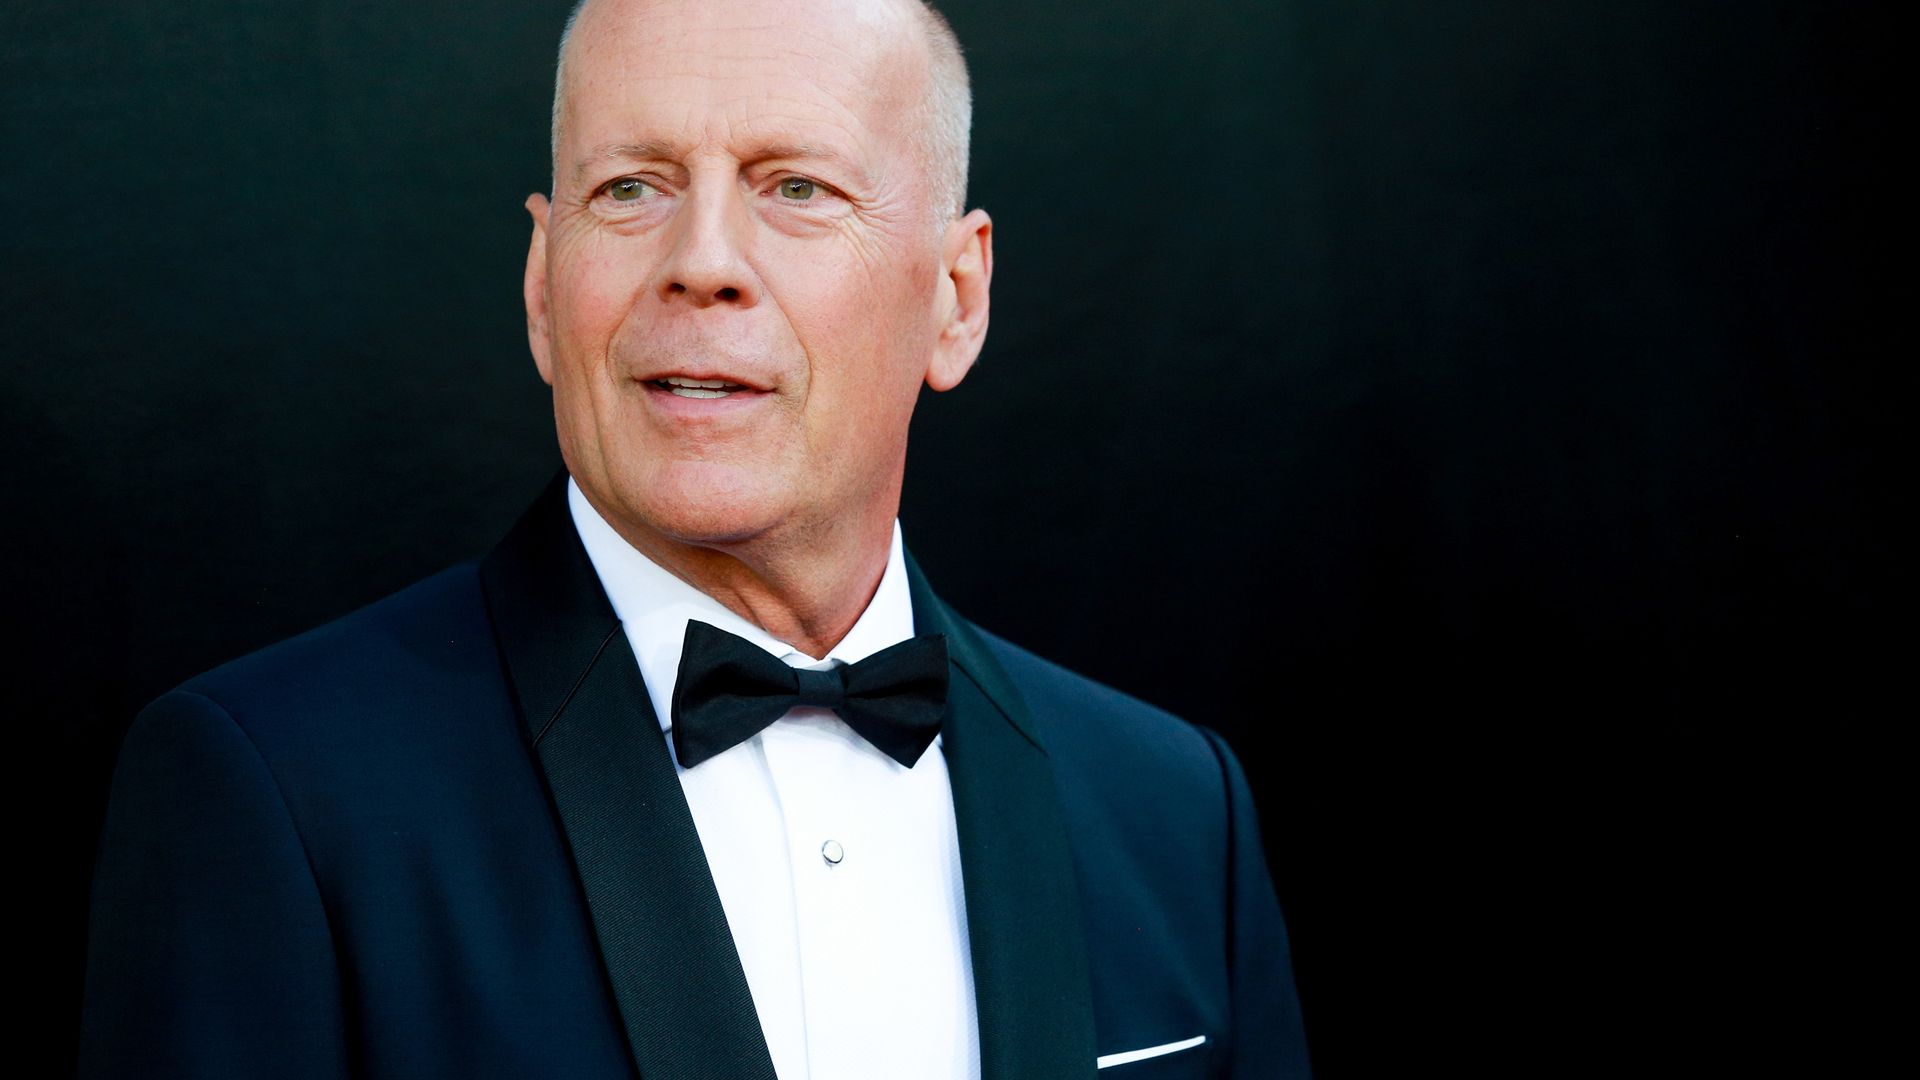 LOS ANGELES, CA - JULY 14:  Bruce Willis attends the Comedy Central Roast of Bruce Willis at Hollywood Palladium on July 14, 2018 in Los Angeles, California.  (Photo by Rich Fury/Getty Images)